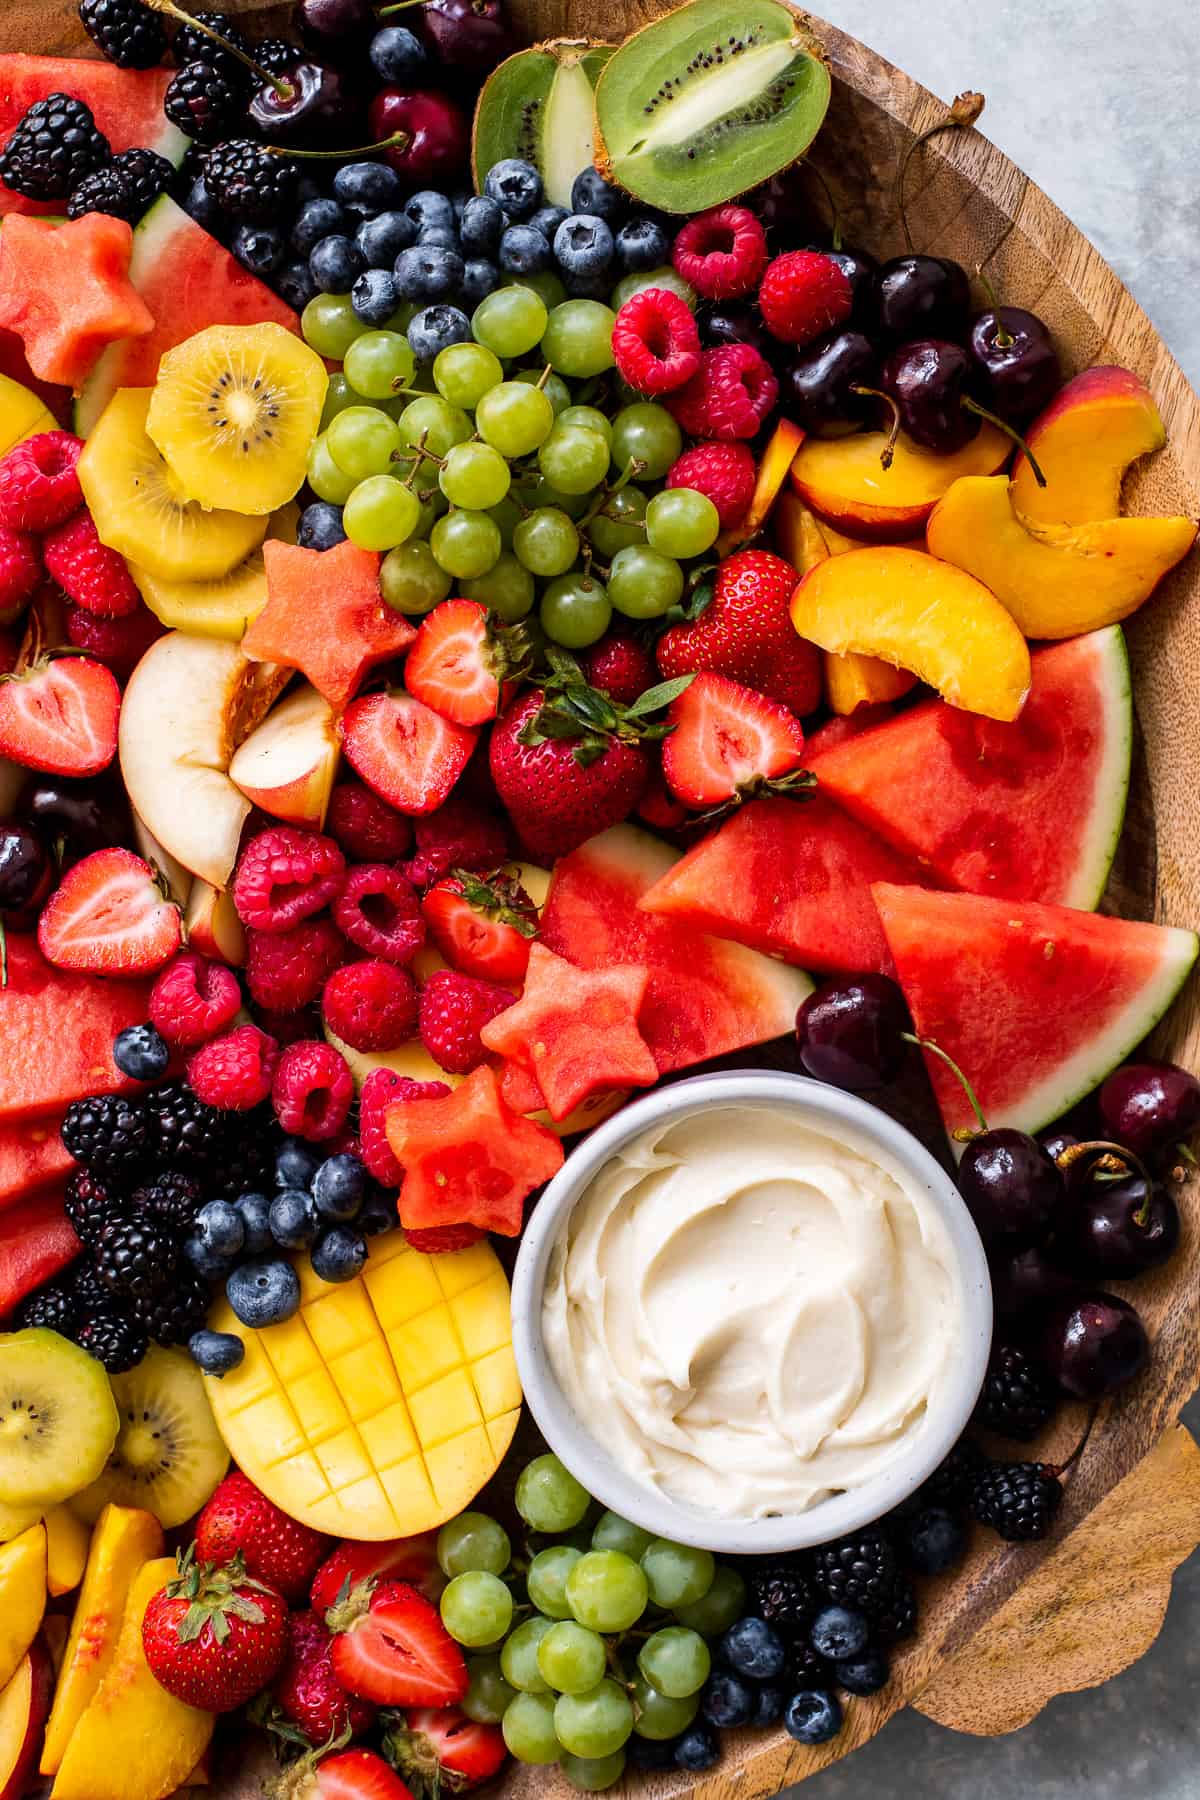 Best fruits for fruit tray